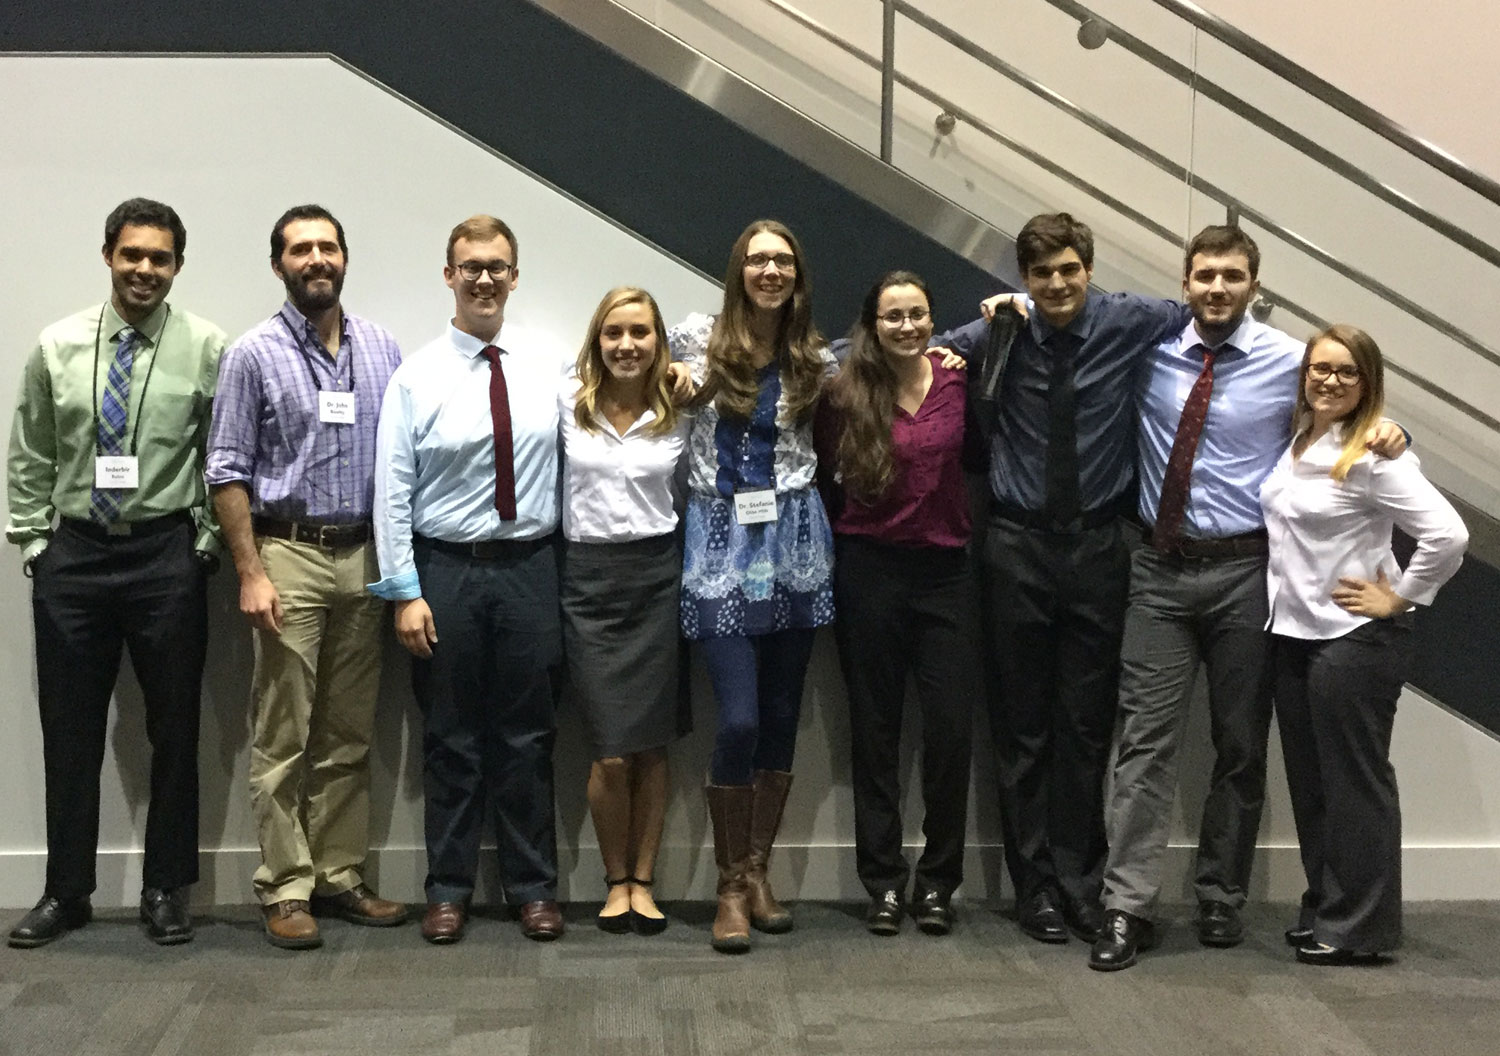 Students presented their research at the Murdock College Undergraduate Research Conference in Spokane, WA.